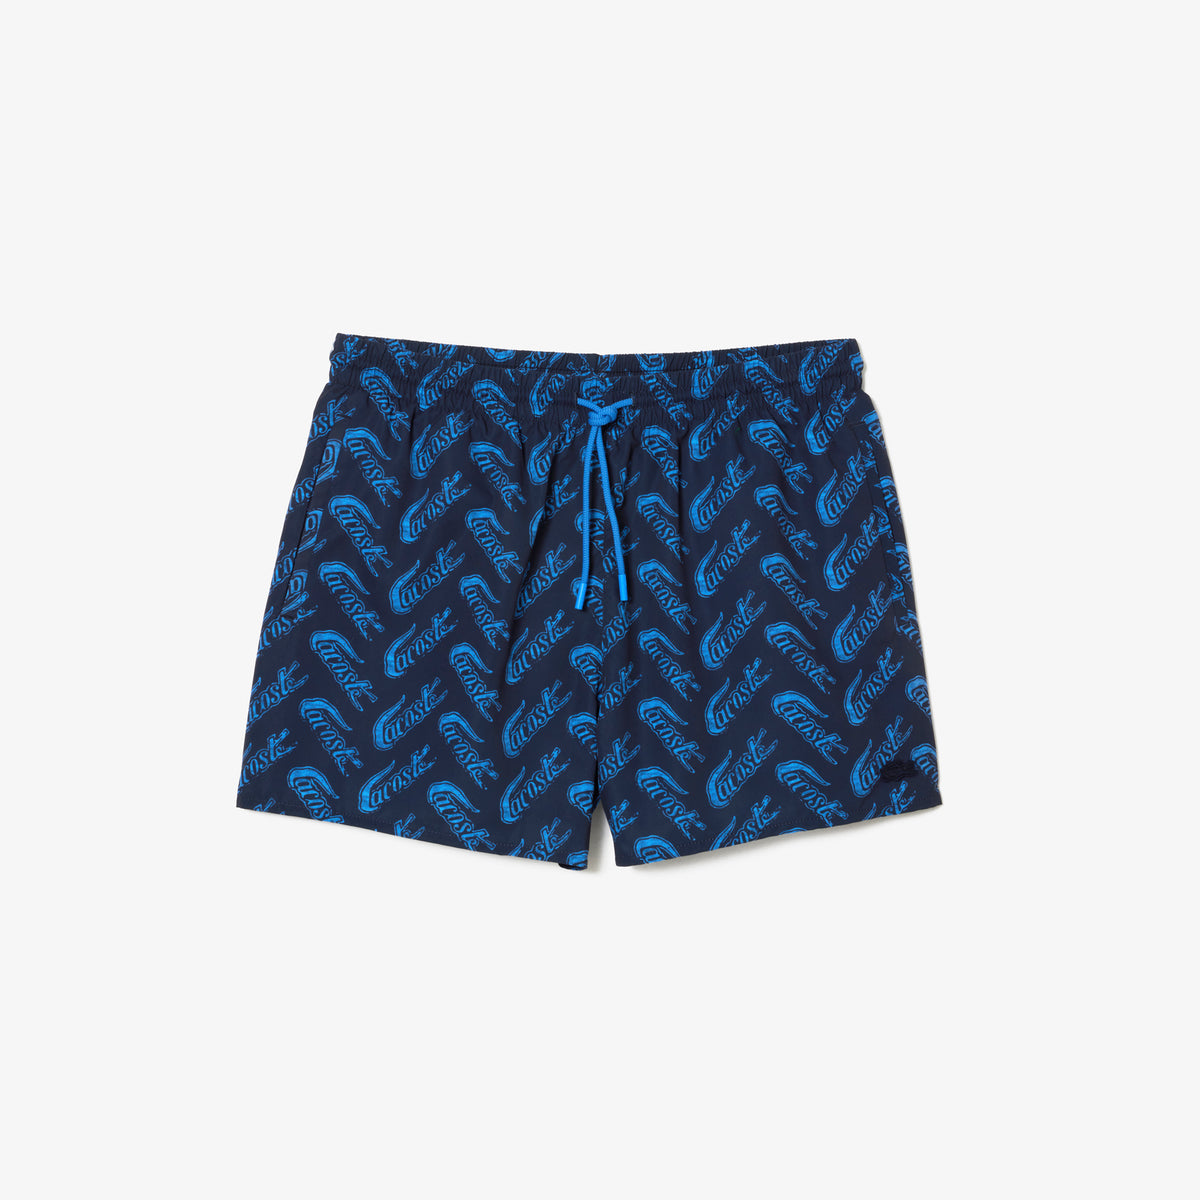 Lacoste - Recycled Polyester Print Swim Trunks - Navy Blue/Blue